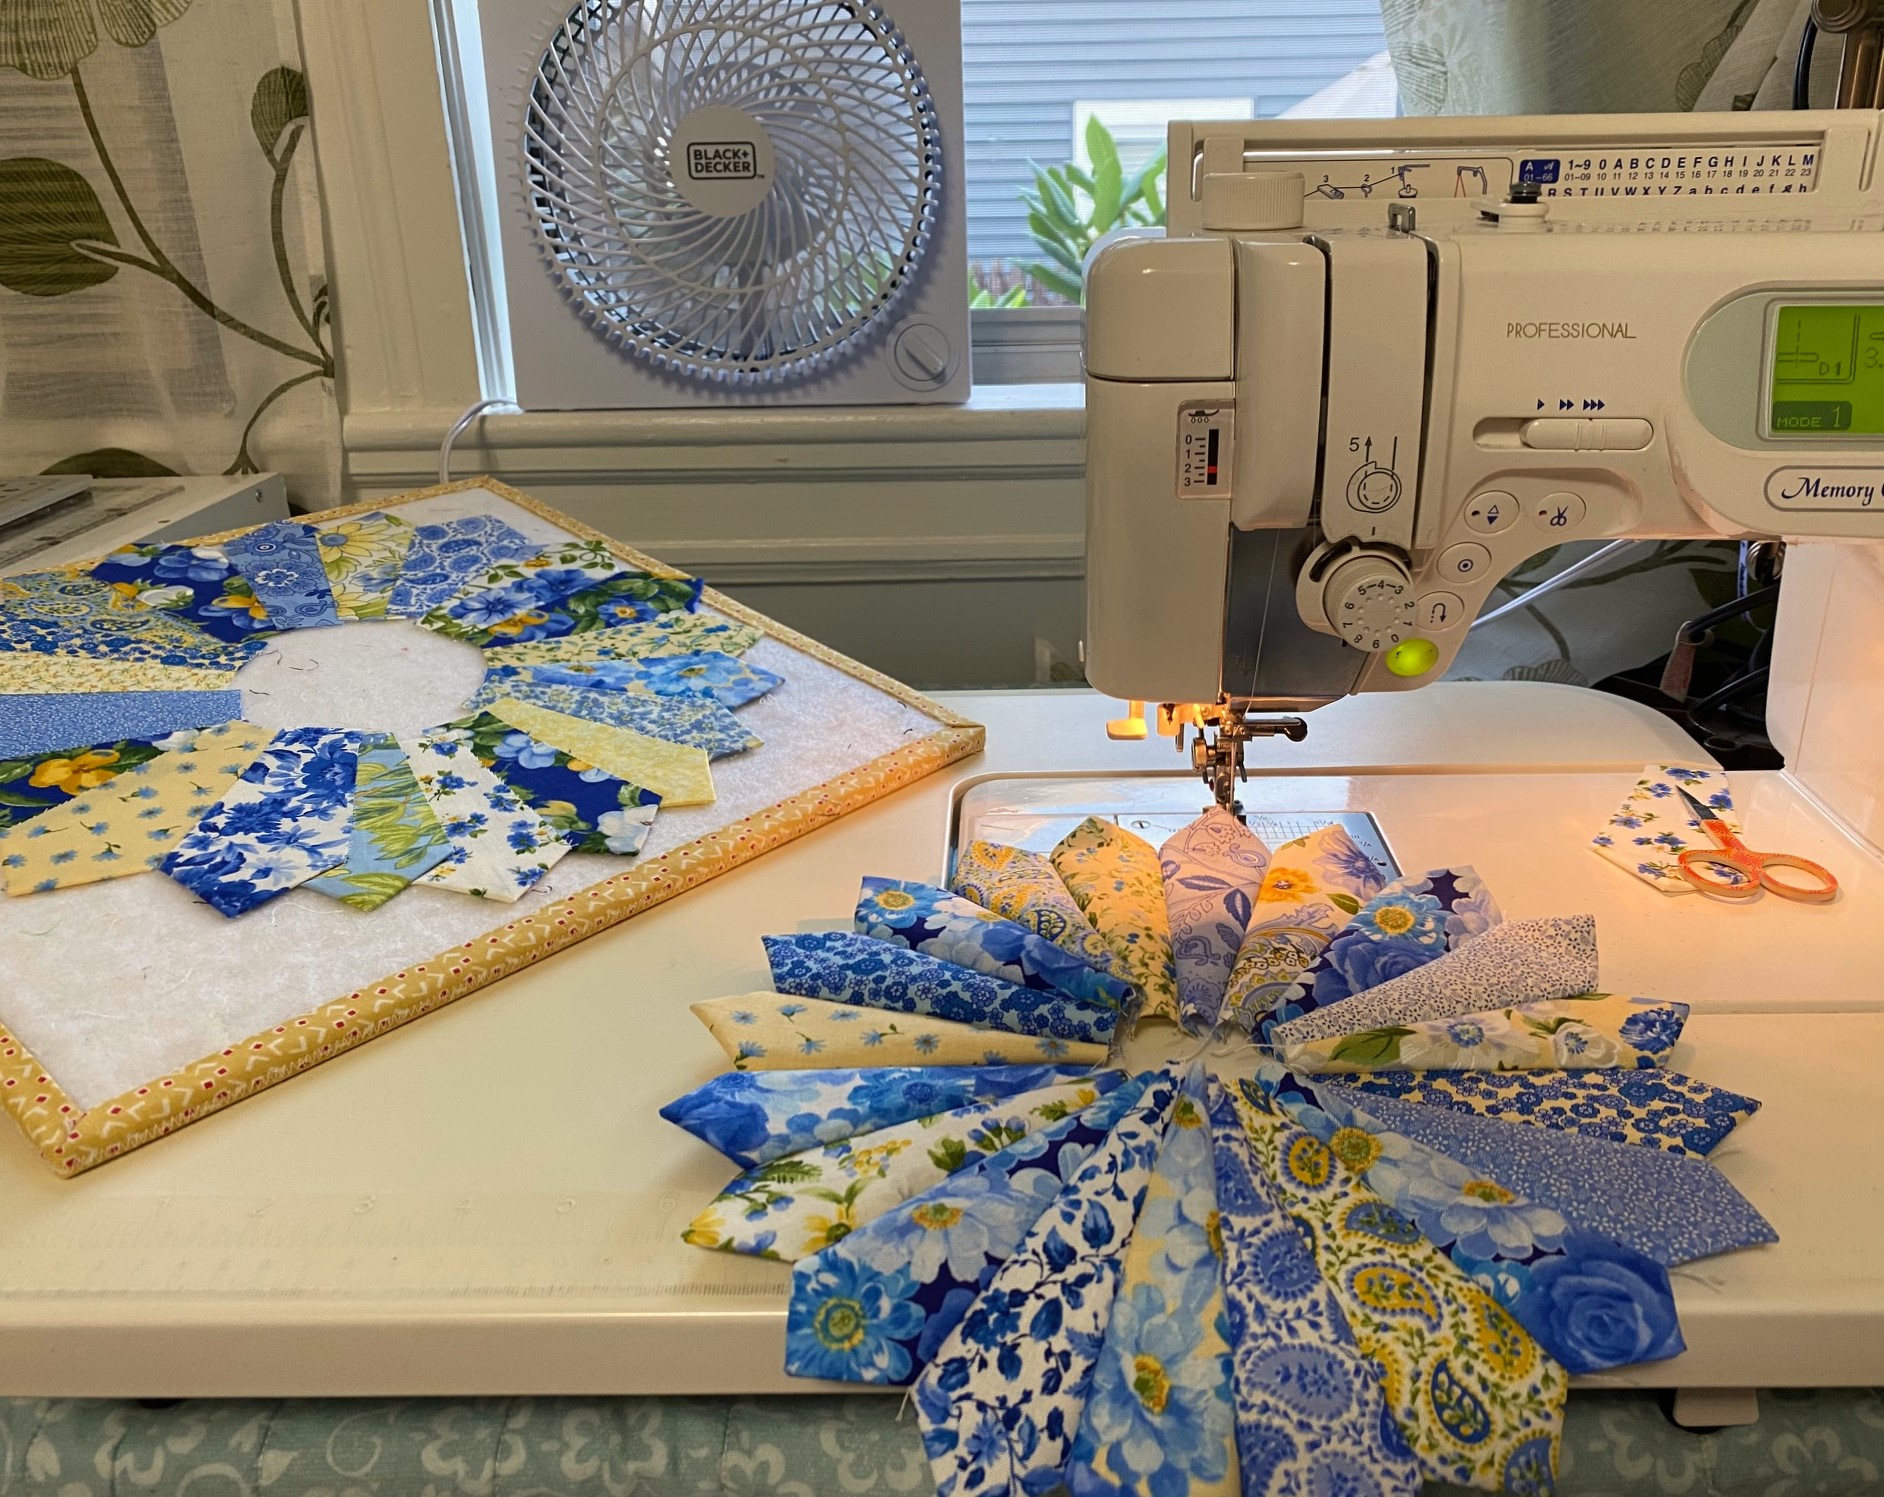 Big Stitch Quilting - Hand Quilting Supplies for Beginners with Corey Yoder